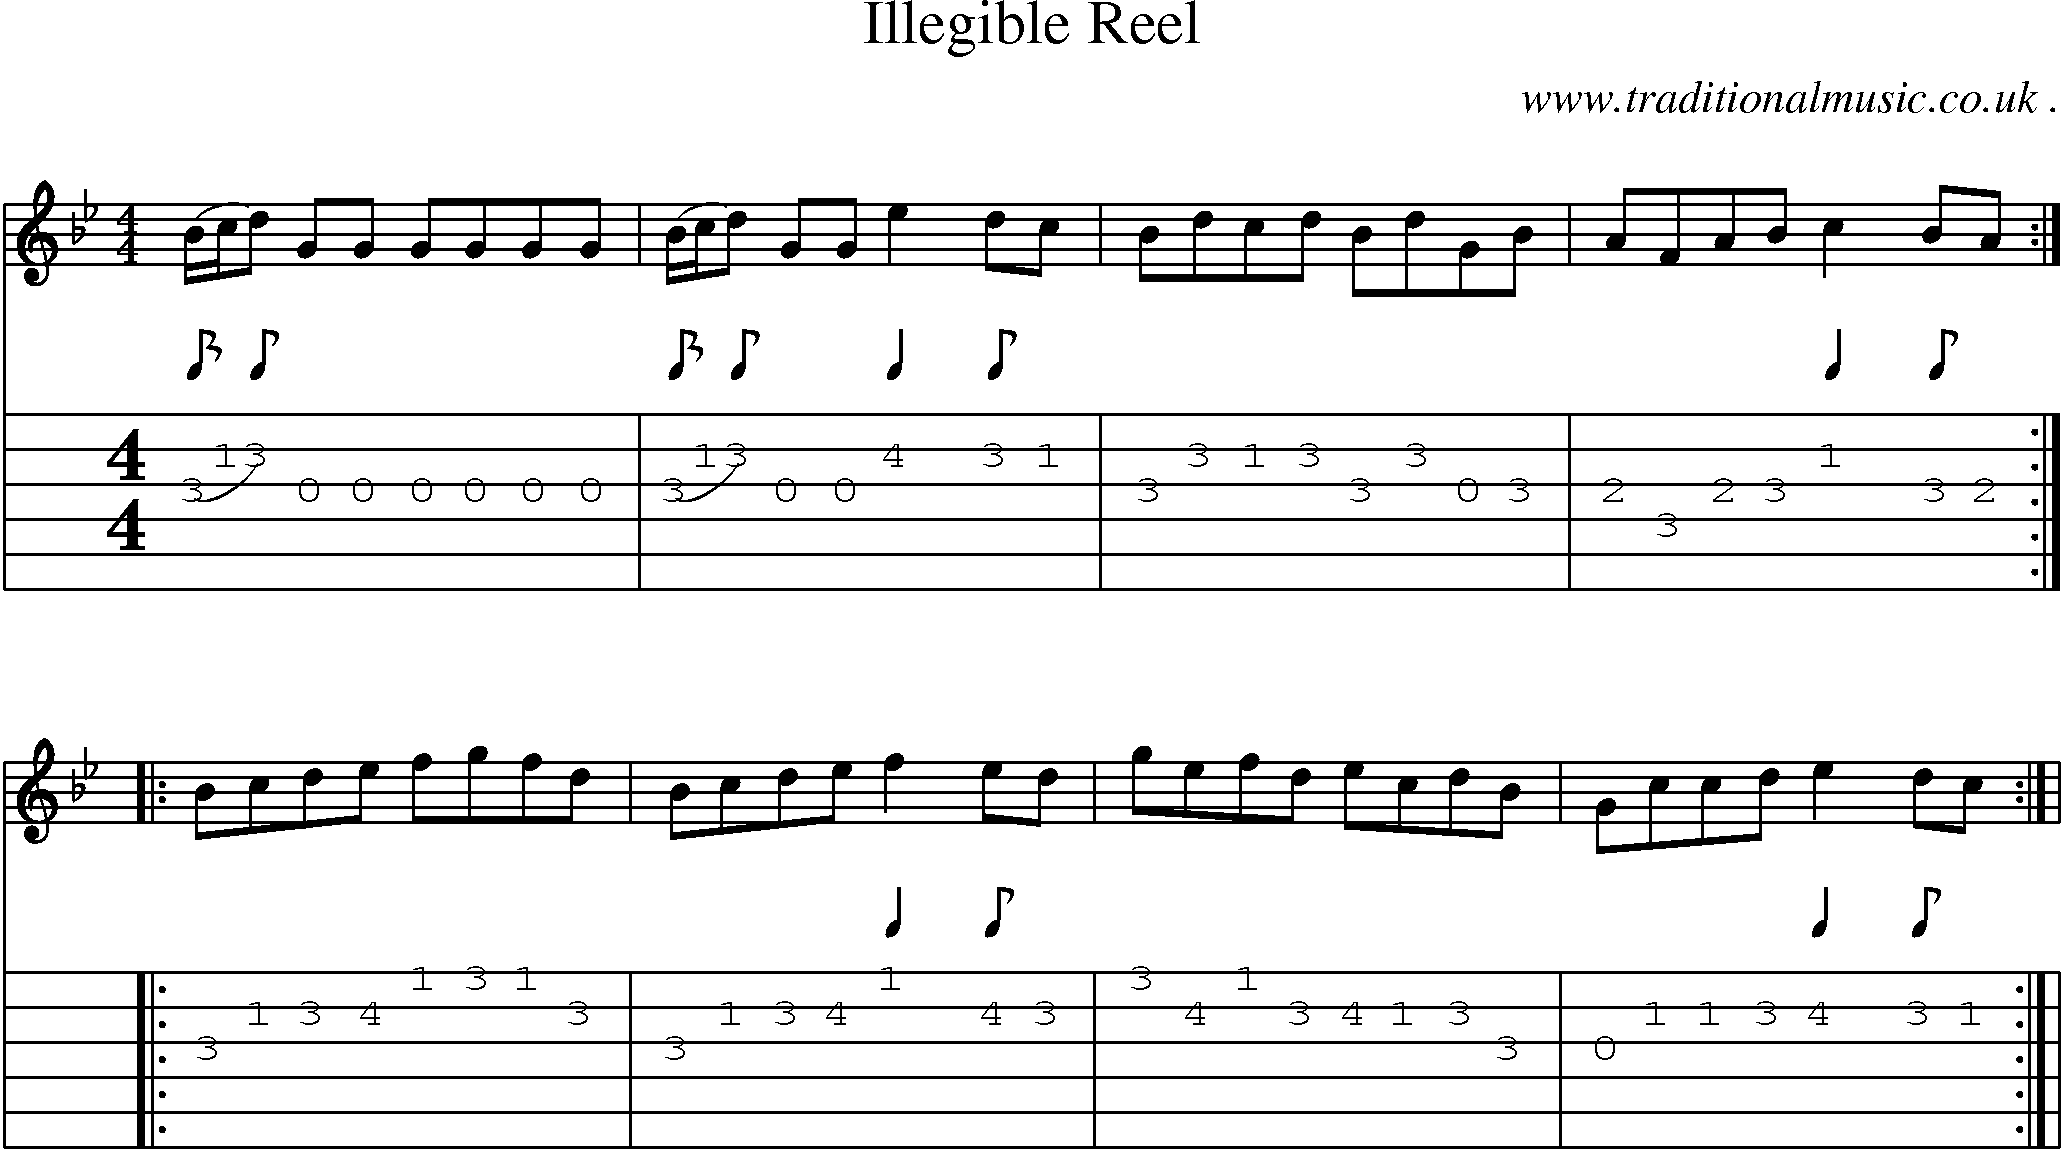 Sheet-Music and Guitar Tabs for Illegible Reel